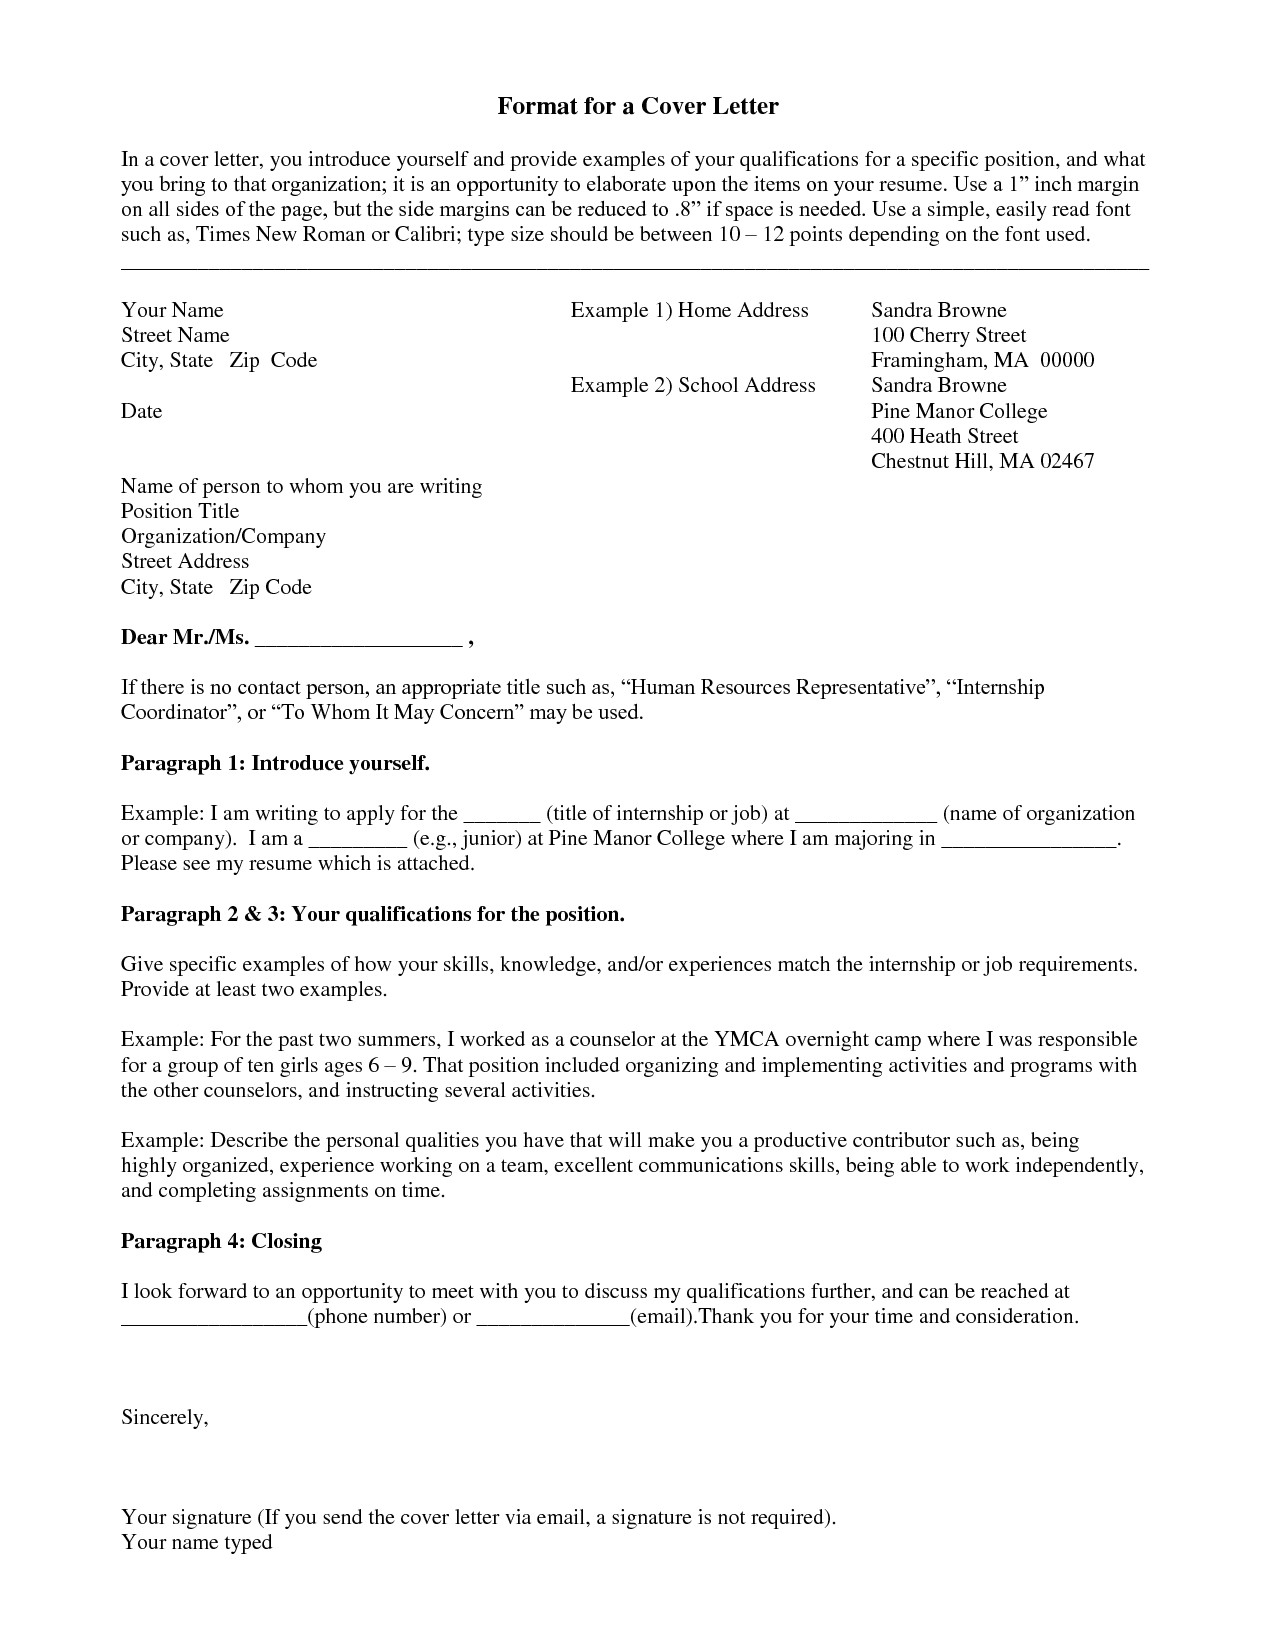 How to Introduce Yourself In A Cover Letter 7 How to Introduce Yourself In A Letter Memo formats